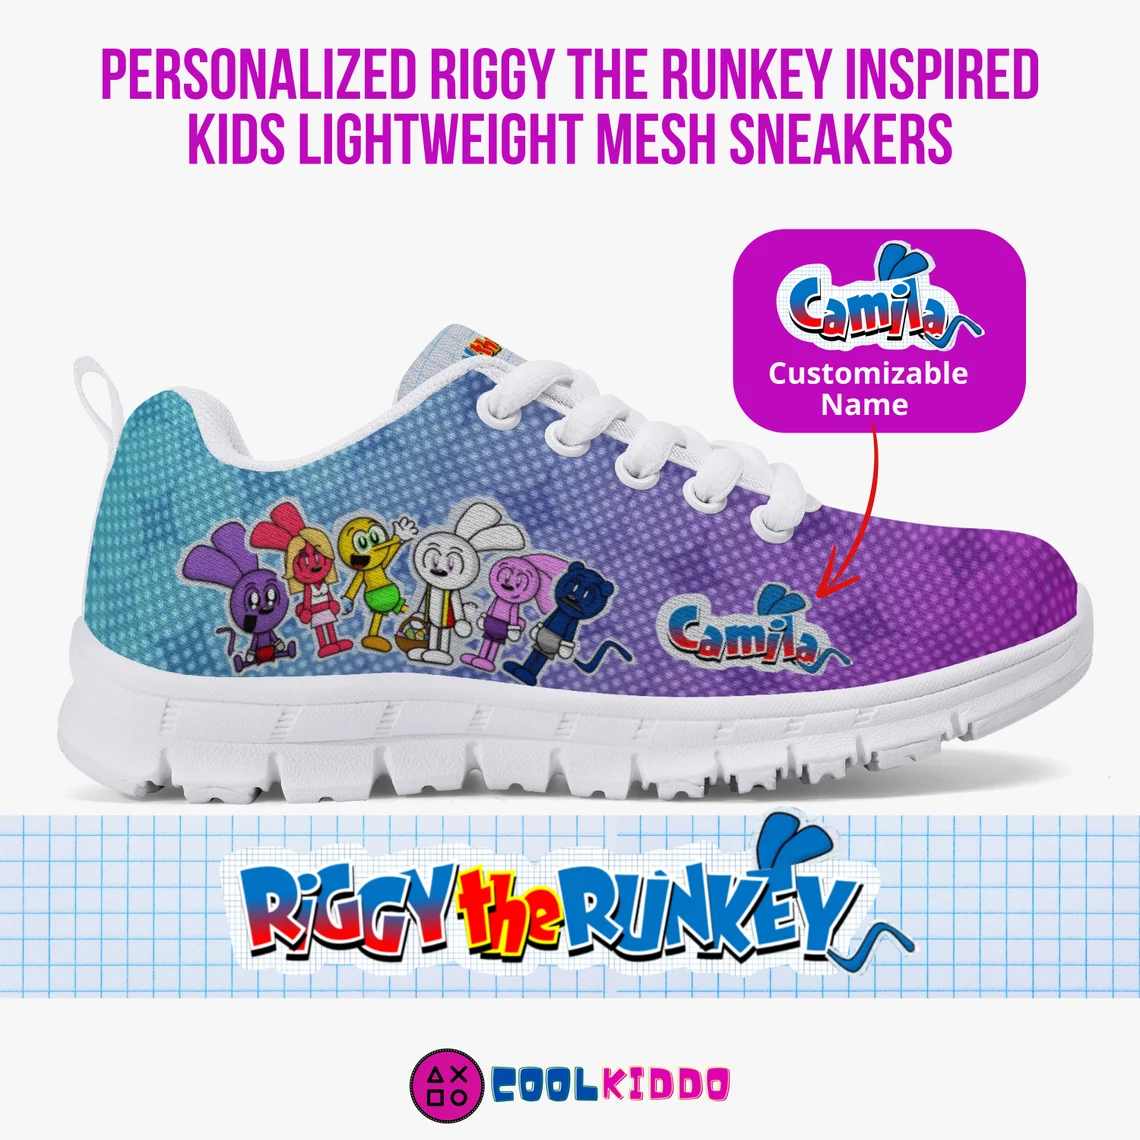 Personalized RiGGY the RUNKEY Lightweight Mesh Sneakers for kids and youth Cool Kiddo 10